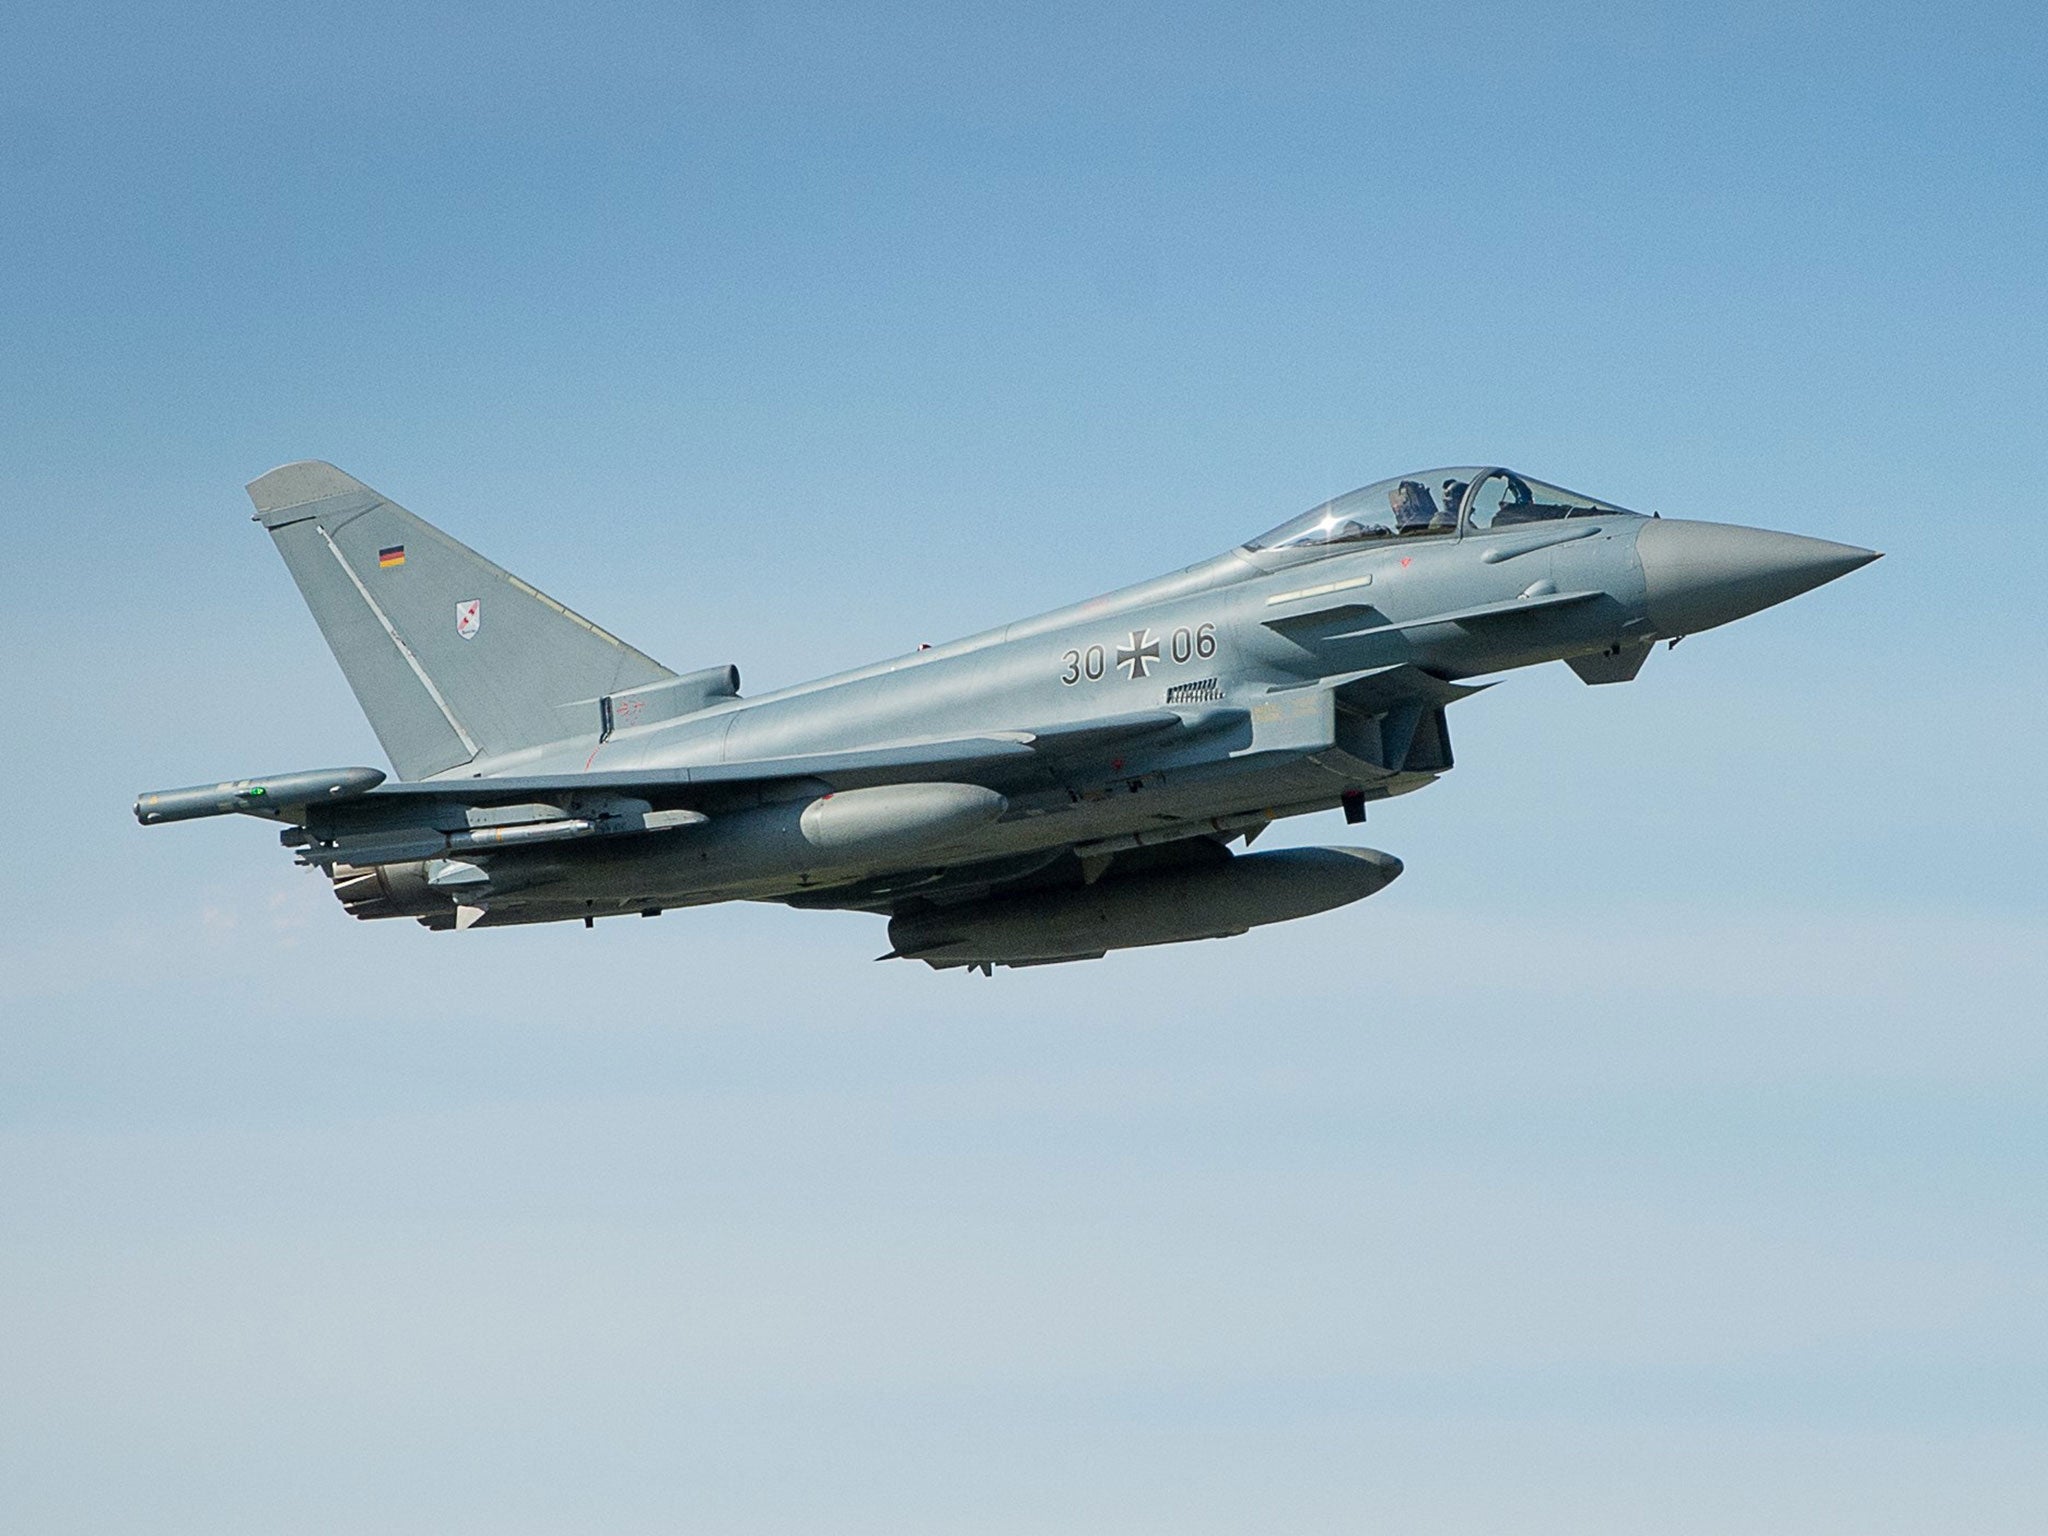 A German Eurofighter Typhoon makes a fly-by during the visit of of German air force chief Lieutenant general Karl Muellner at the Amari Air Base in Harjumaa, Estonia on September 9, 2015.